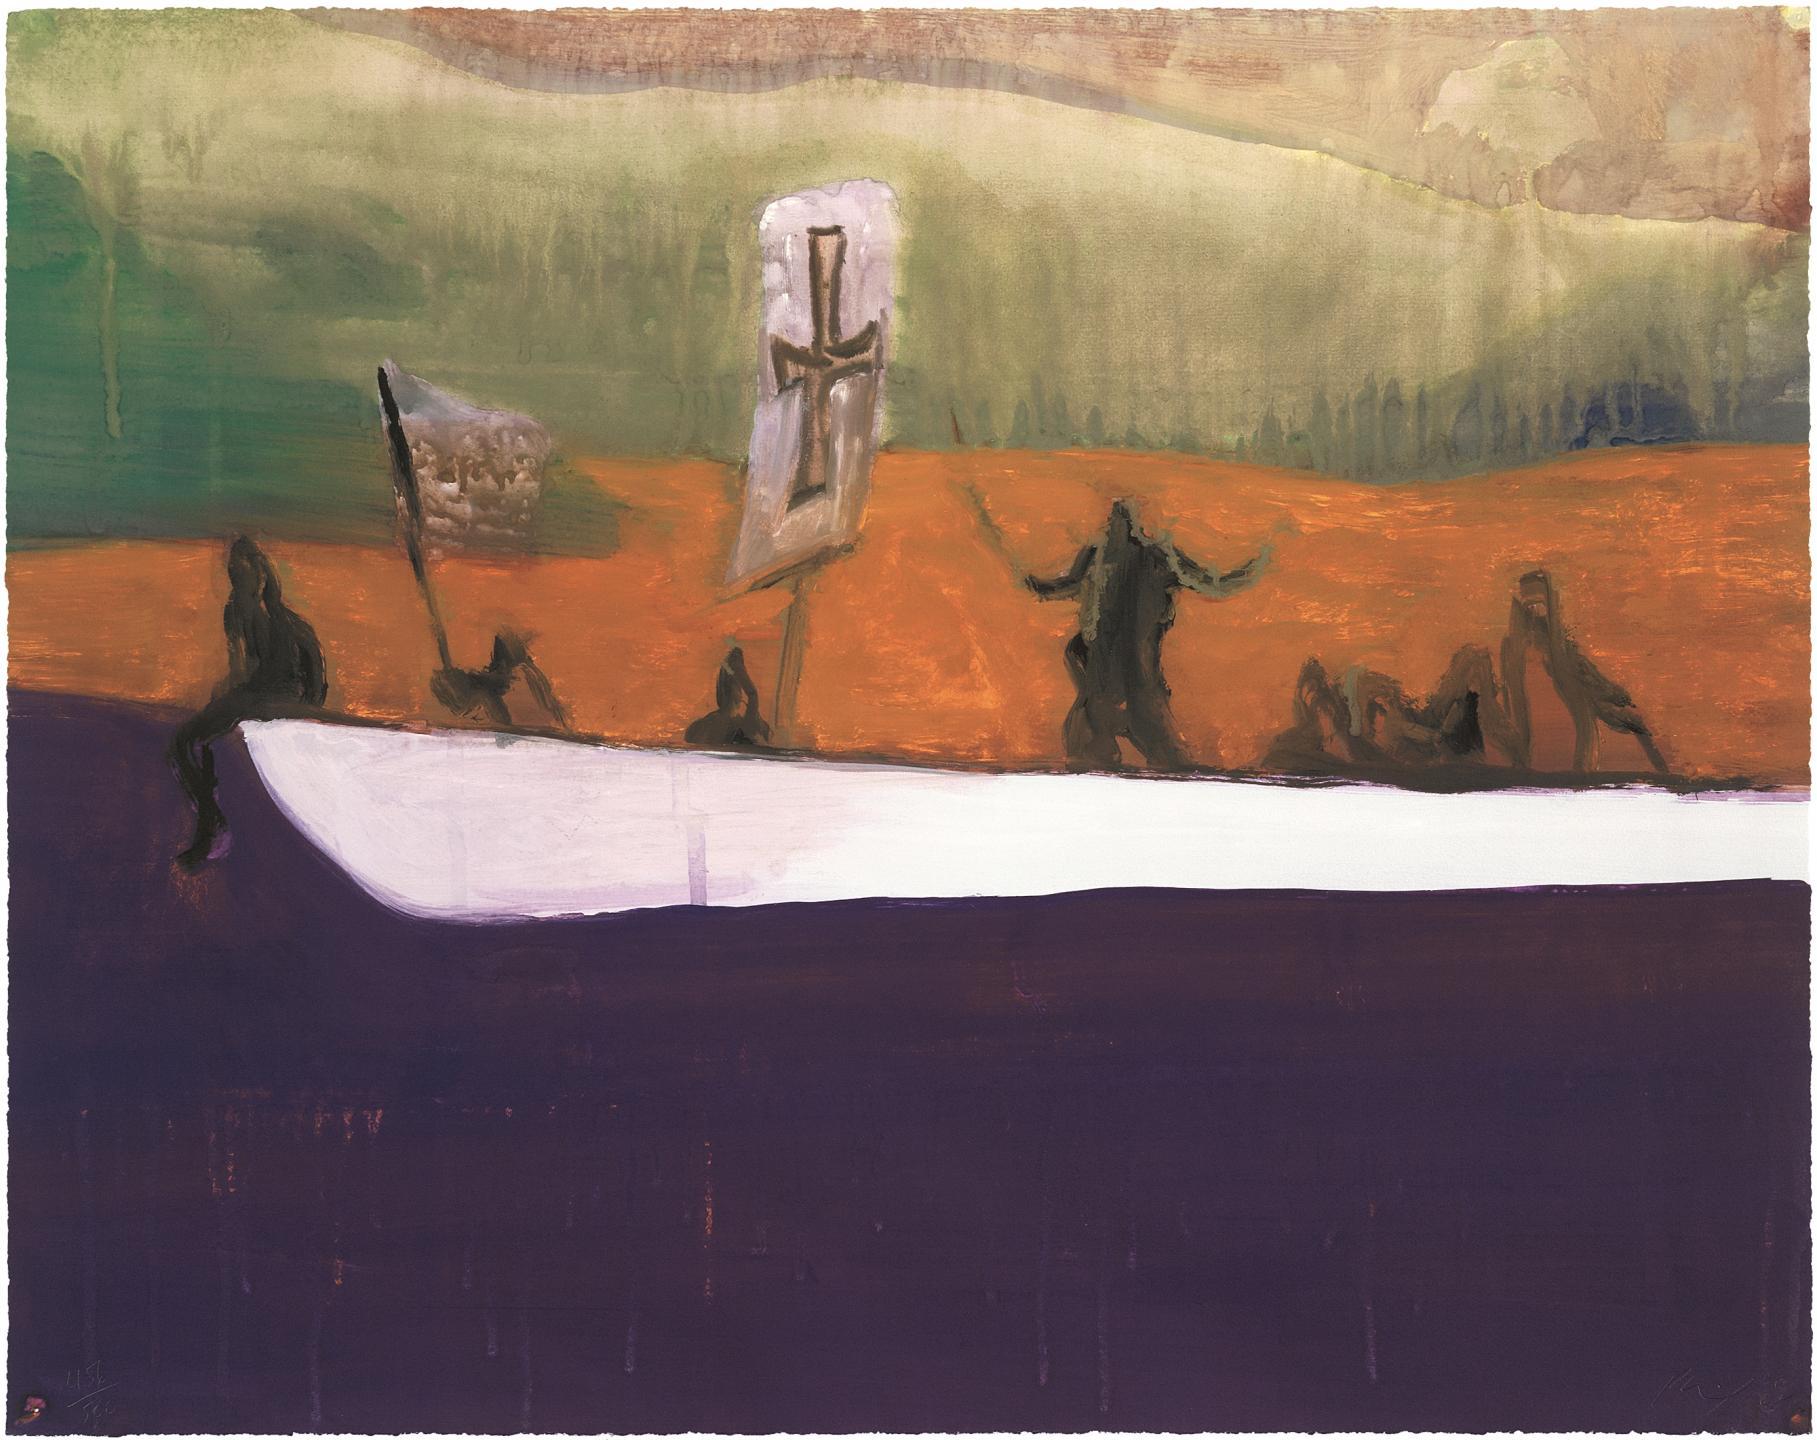 PETER DOIG
Untitled (Canoe), 2008
Aquatint printed in colours, on wove paper
Signed and numbered from the edition of 500 in pencil
Sheet: 59.0 x 74.5 cm ( 23.2 x 29.3 in)